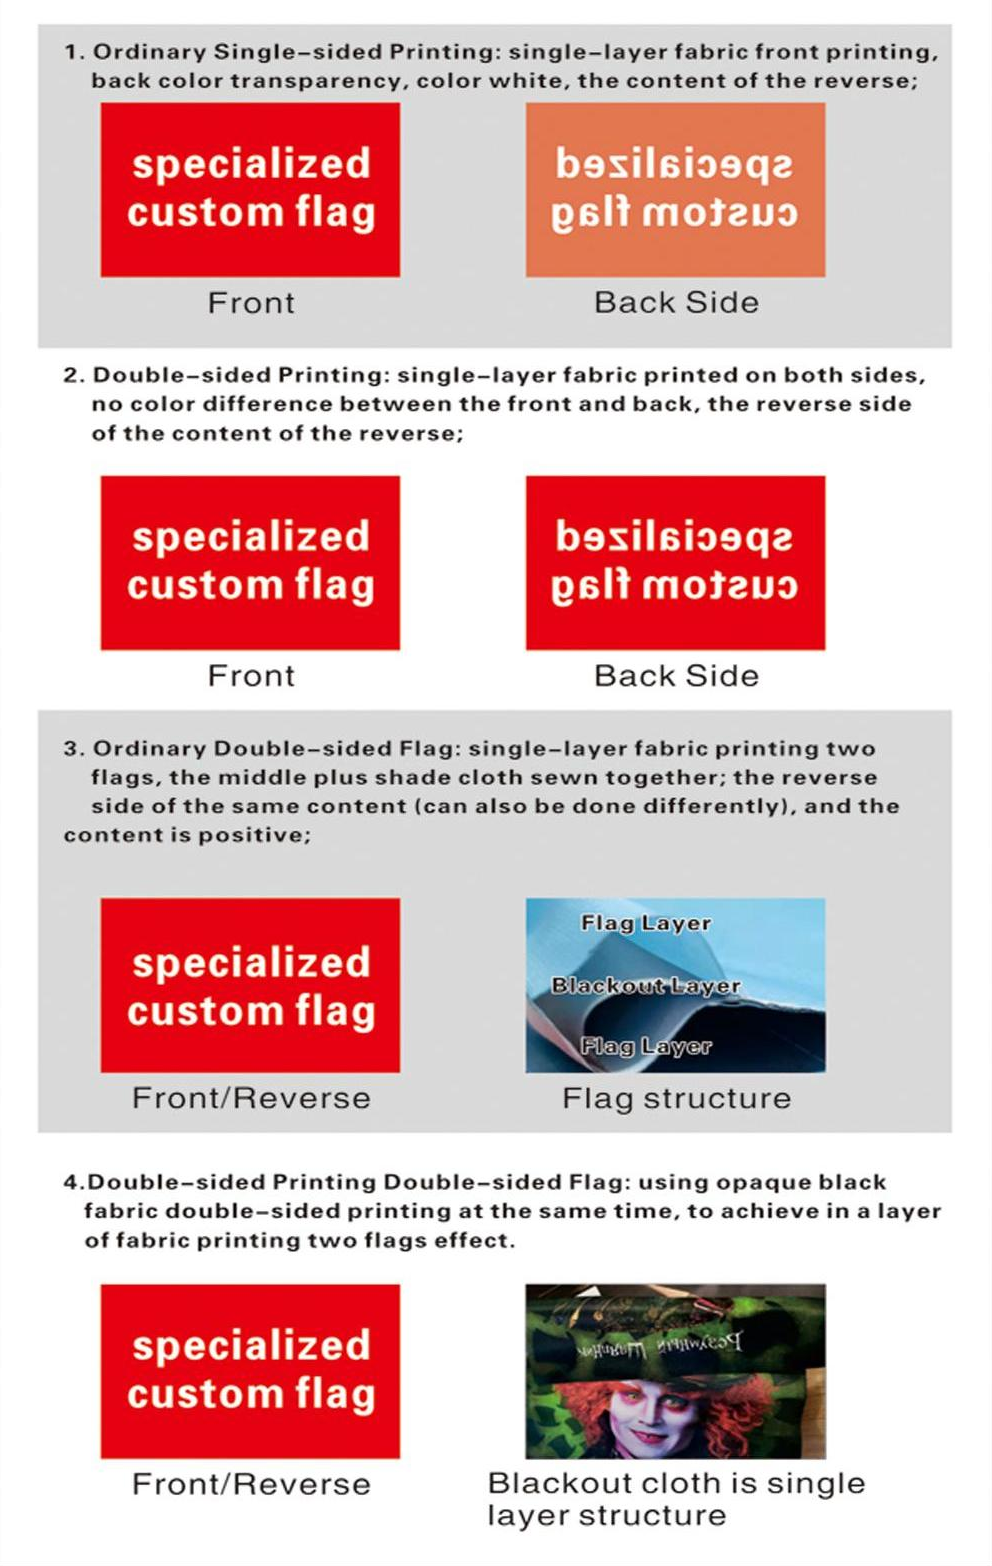 advertising flags and banners